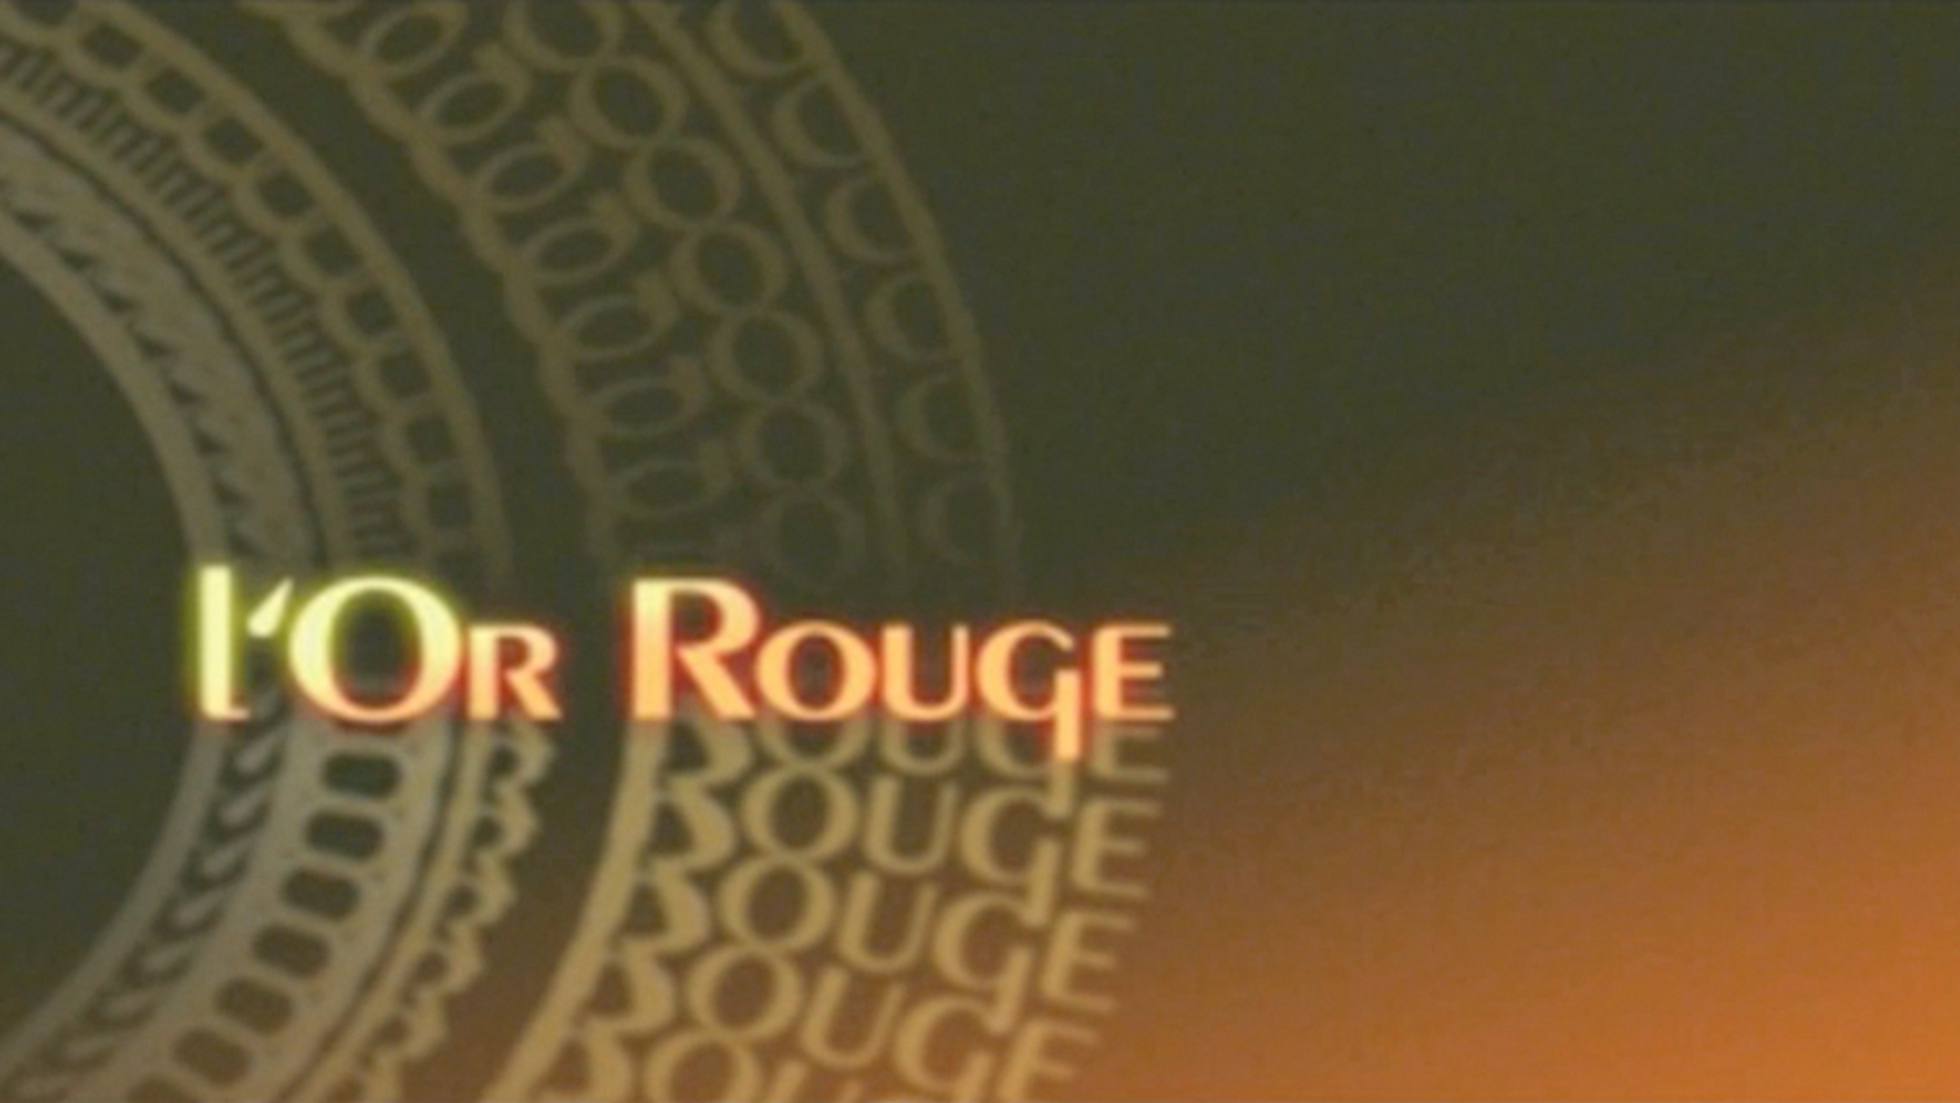 L'OR ROUGE